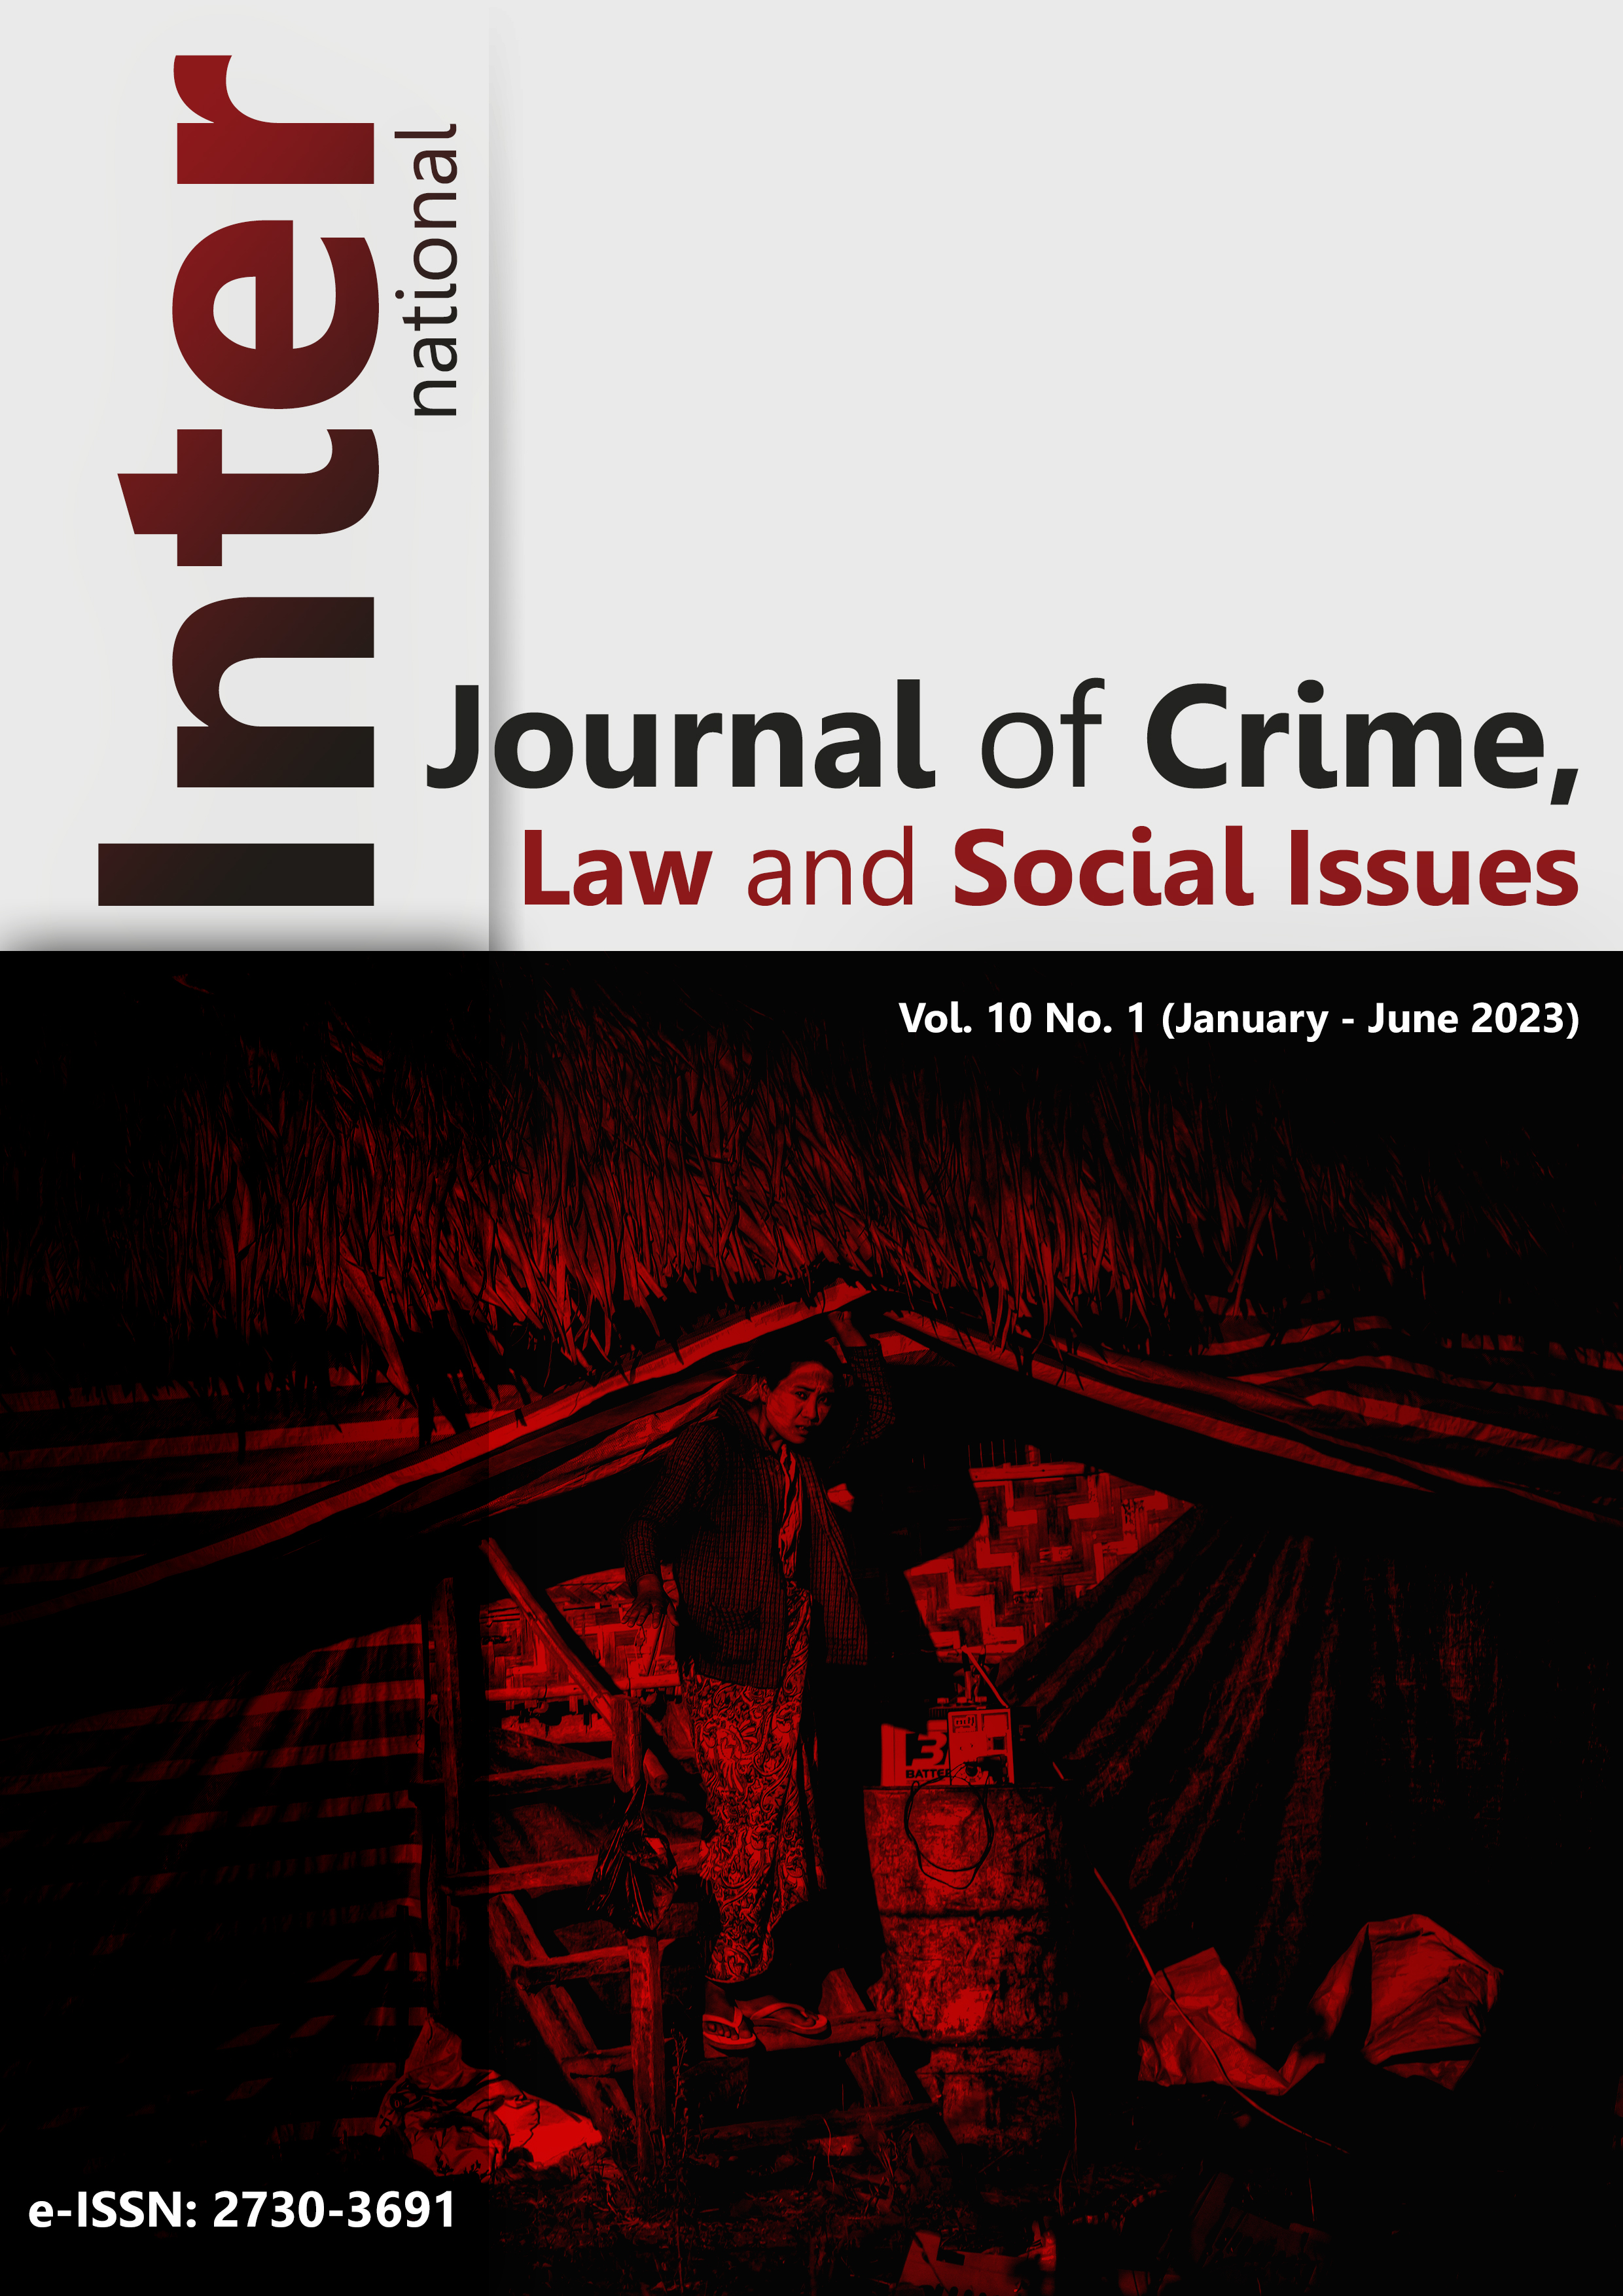 					View Vol. 10 No. 1 (2023): International Journal of Crime, Law and Social Issues
				